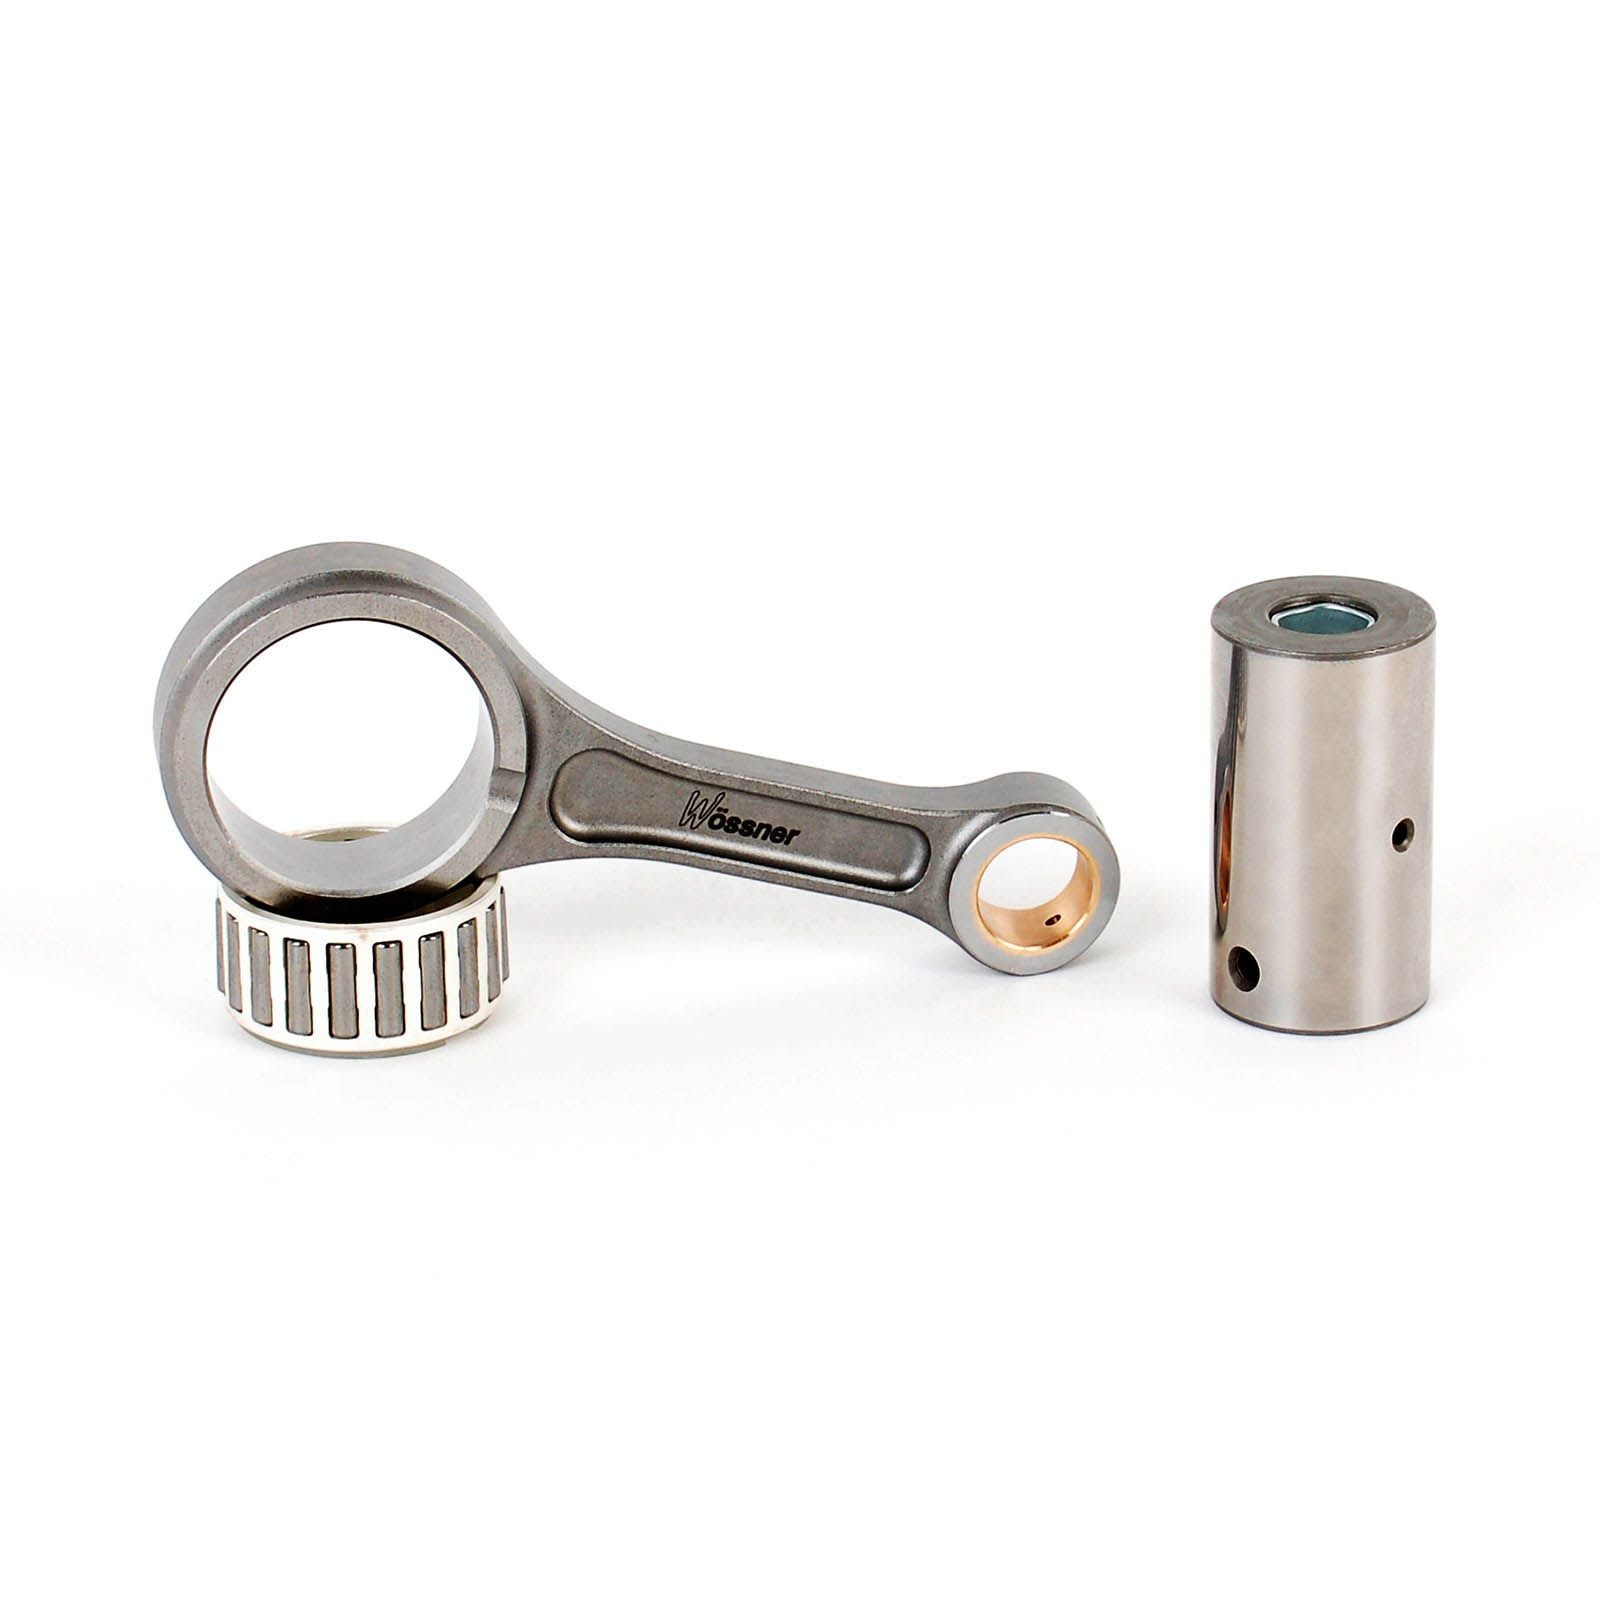 New WOSSNER Conrod For KTM SX450F 2016> (Including Engine Bearings) #WOP4068